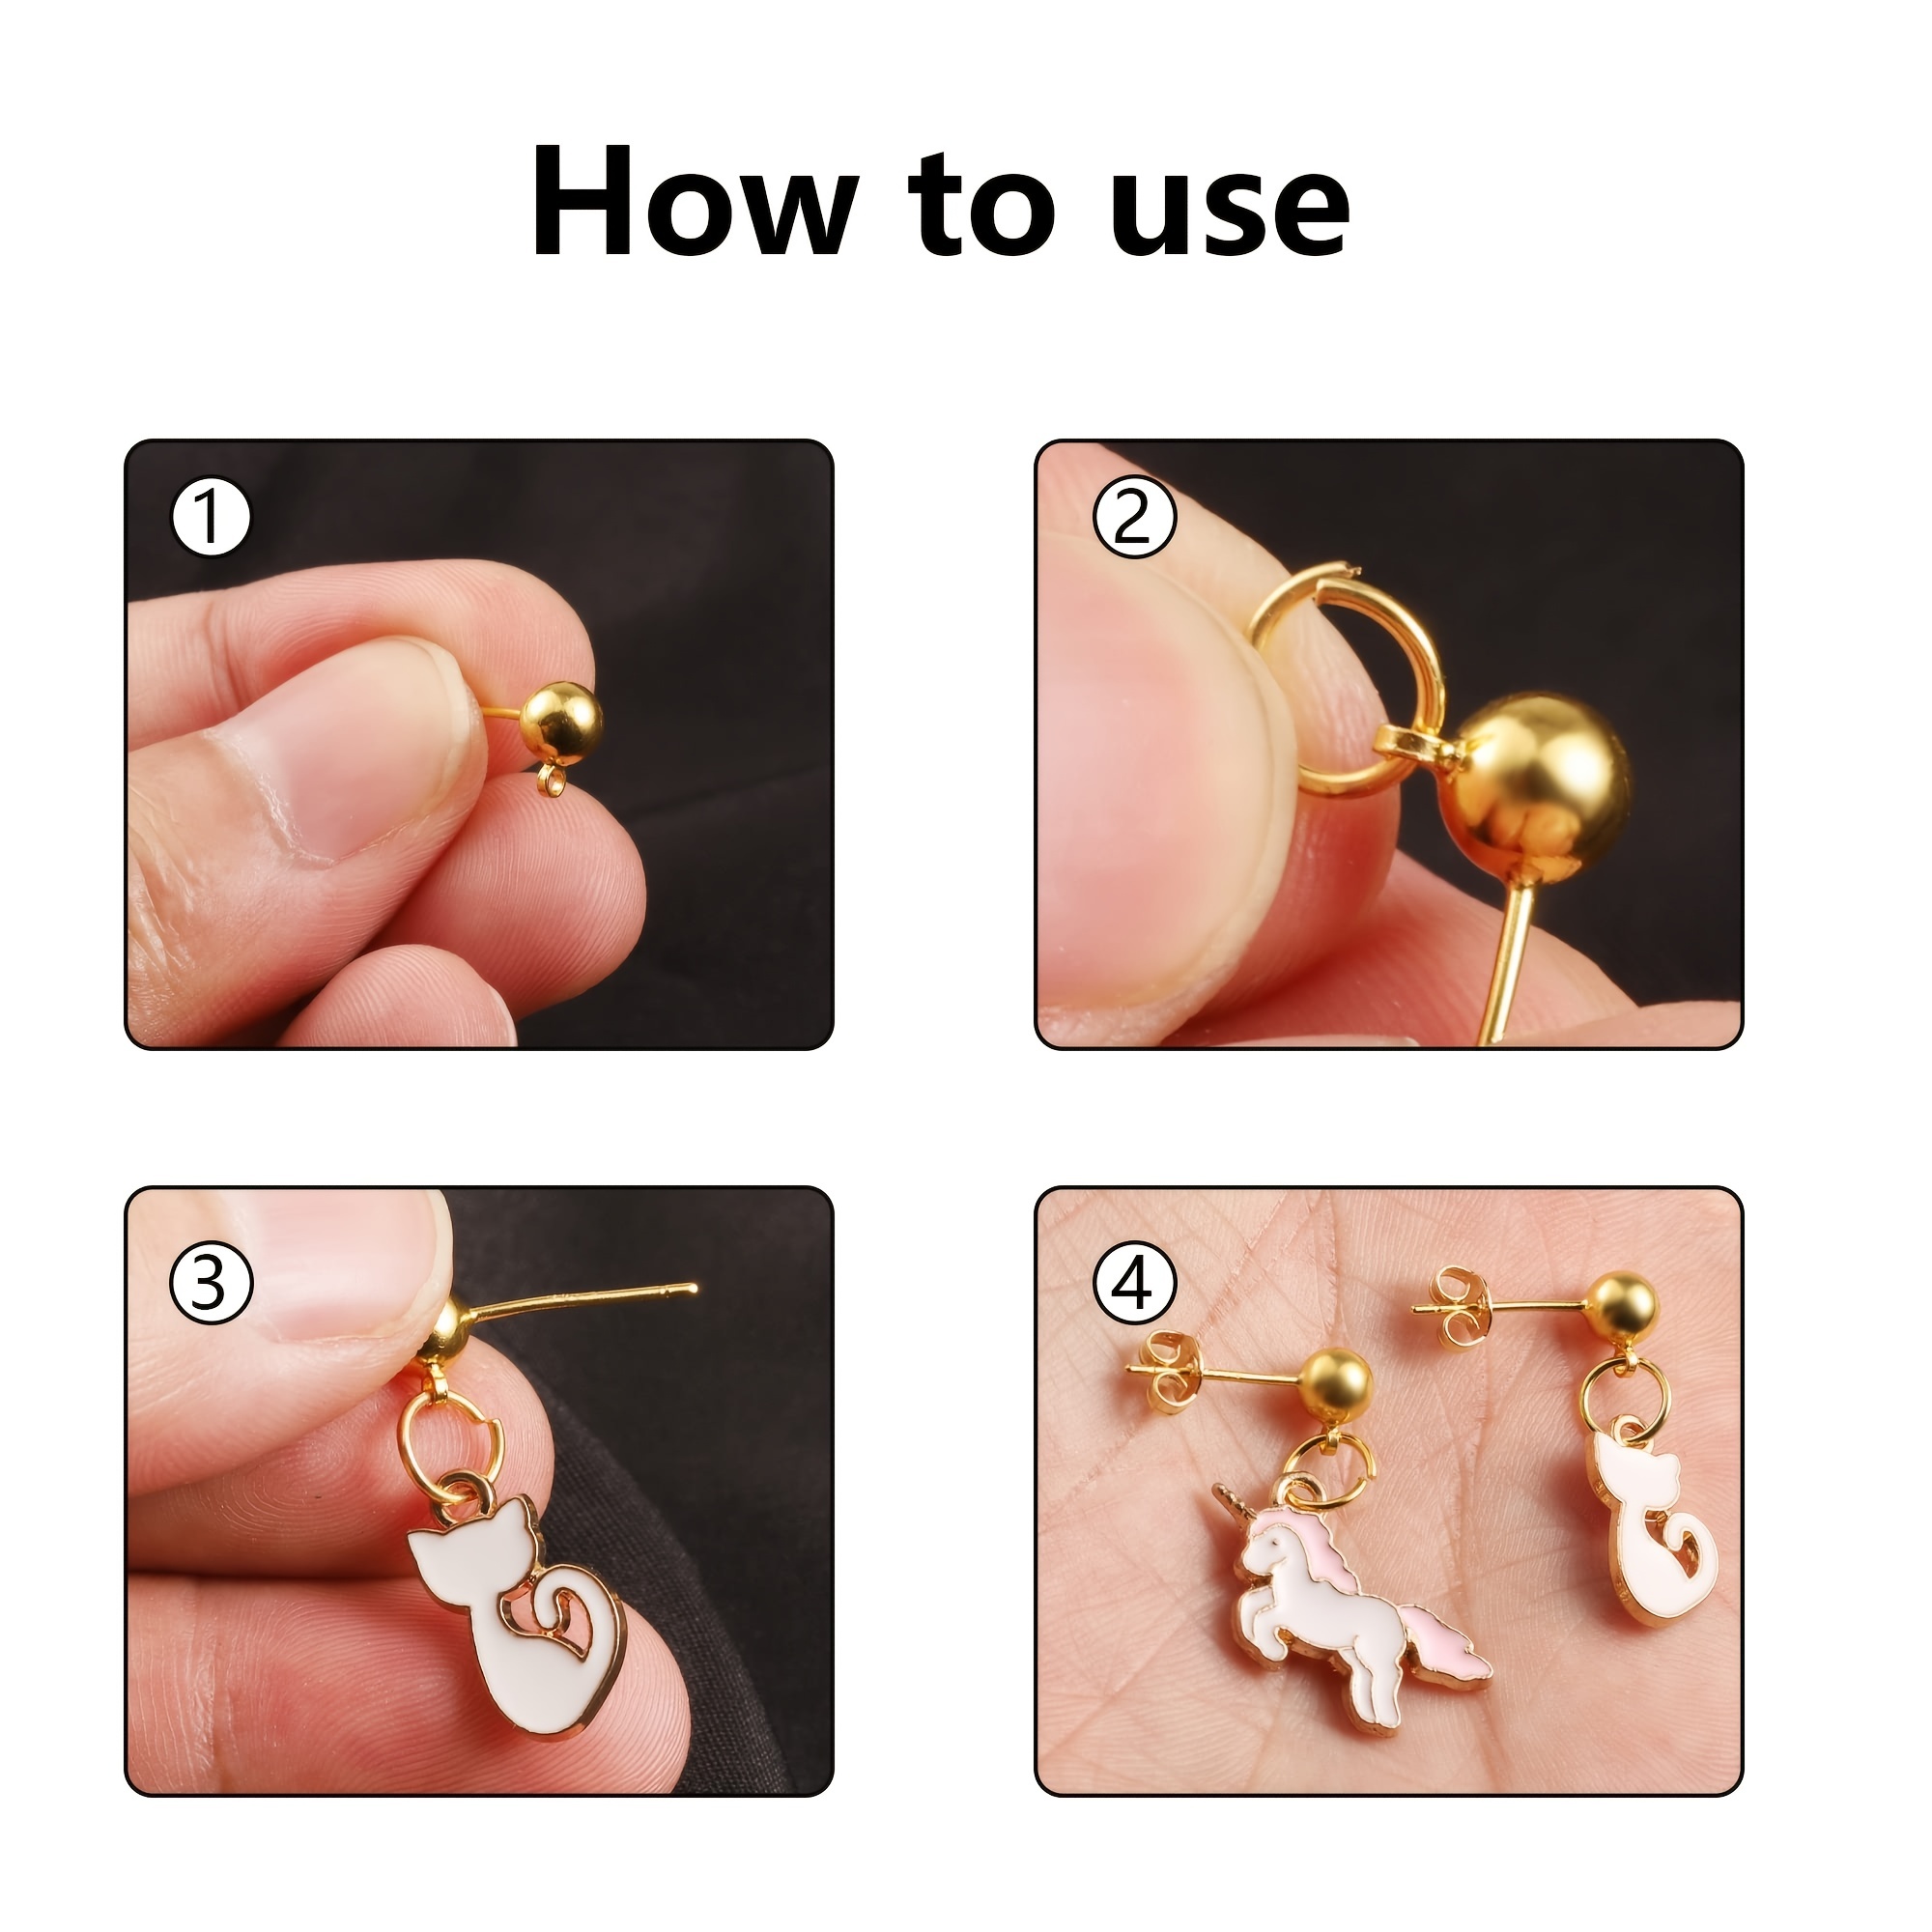 14k Gold Screw Earring Backs Replacements,925 Stering Silver